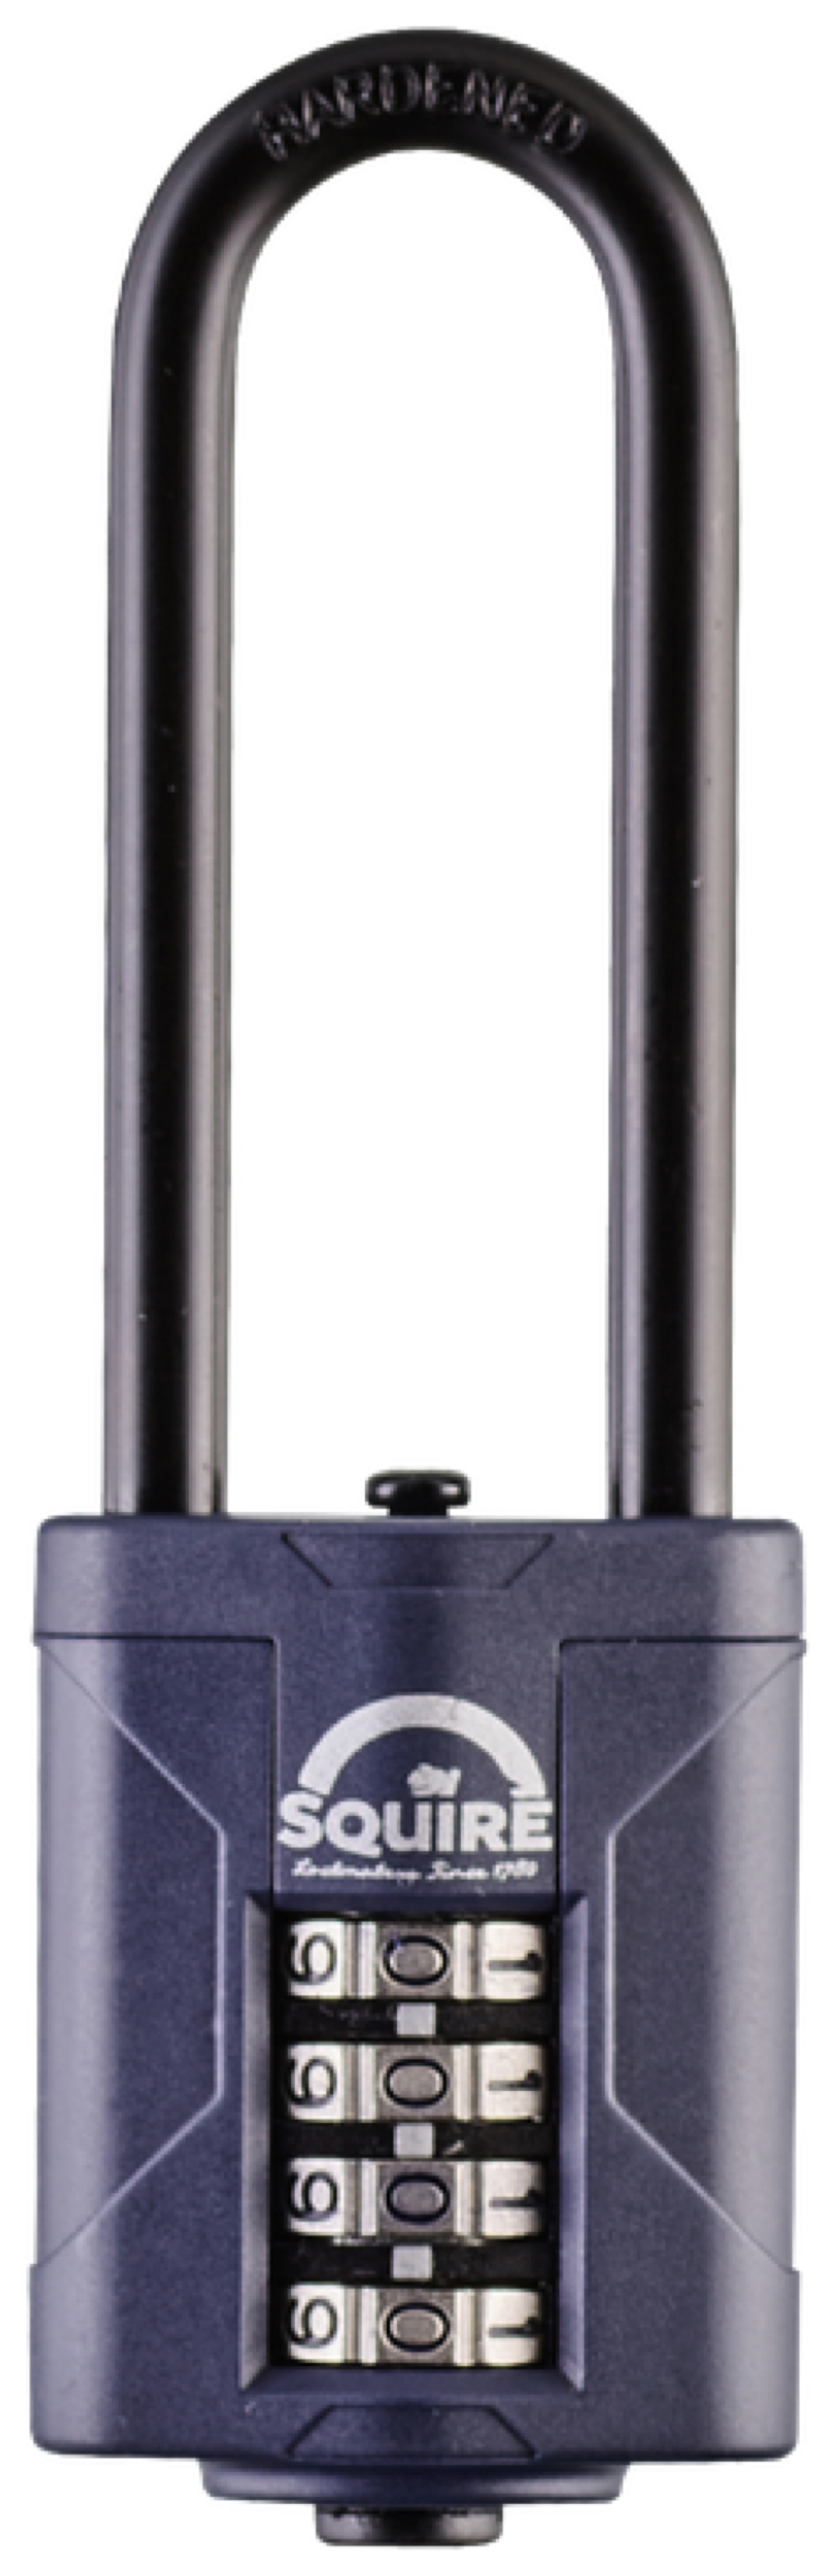 Image of Squire Combination Padlock with Extra Long Hardened Steel Shackle - 40mm